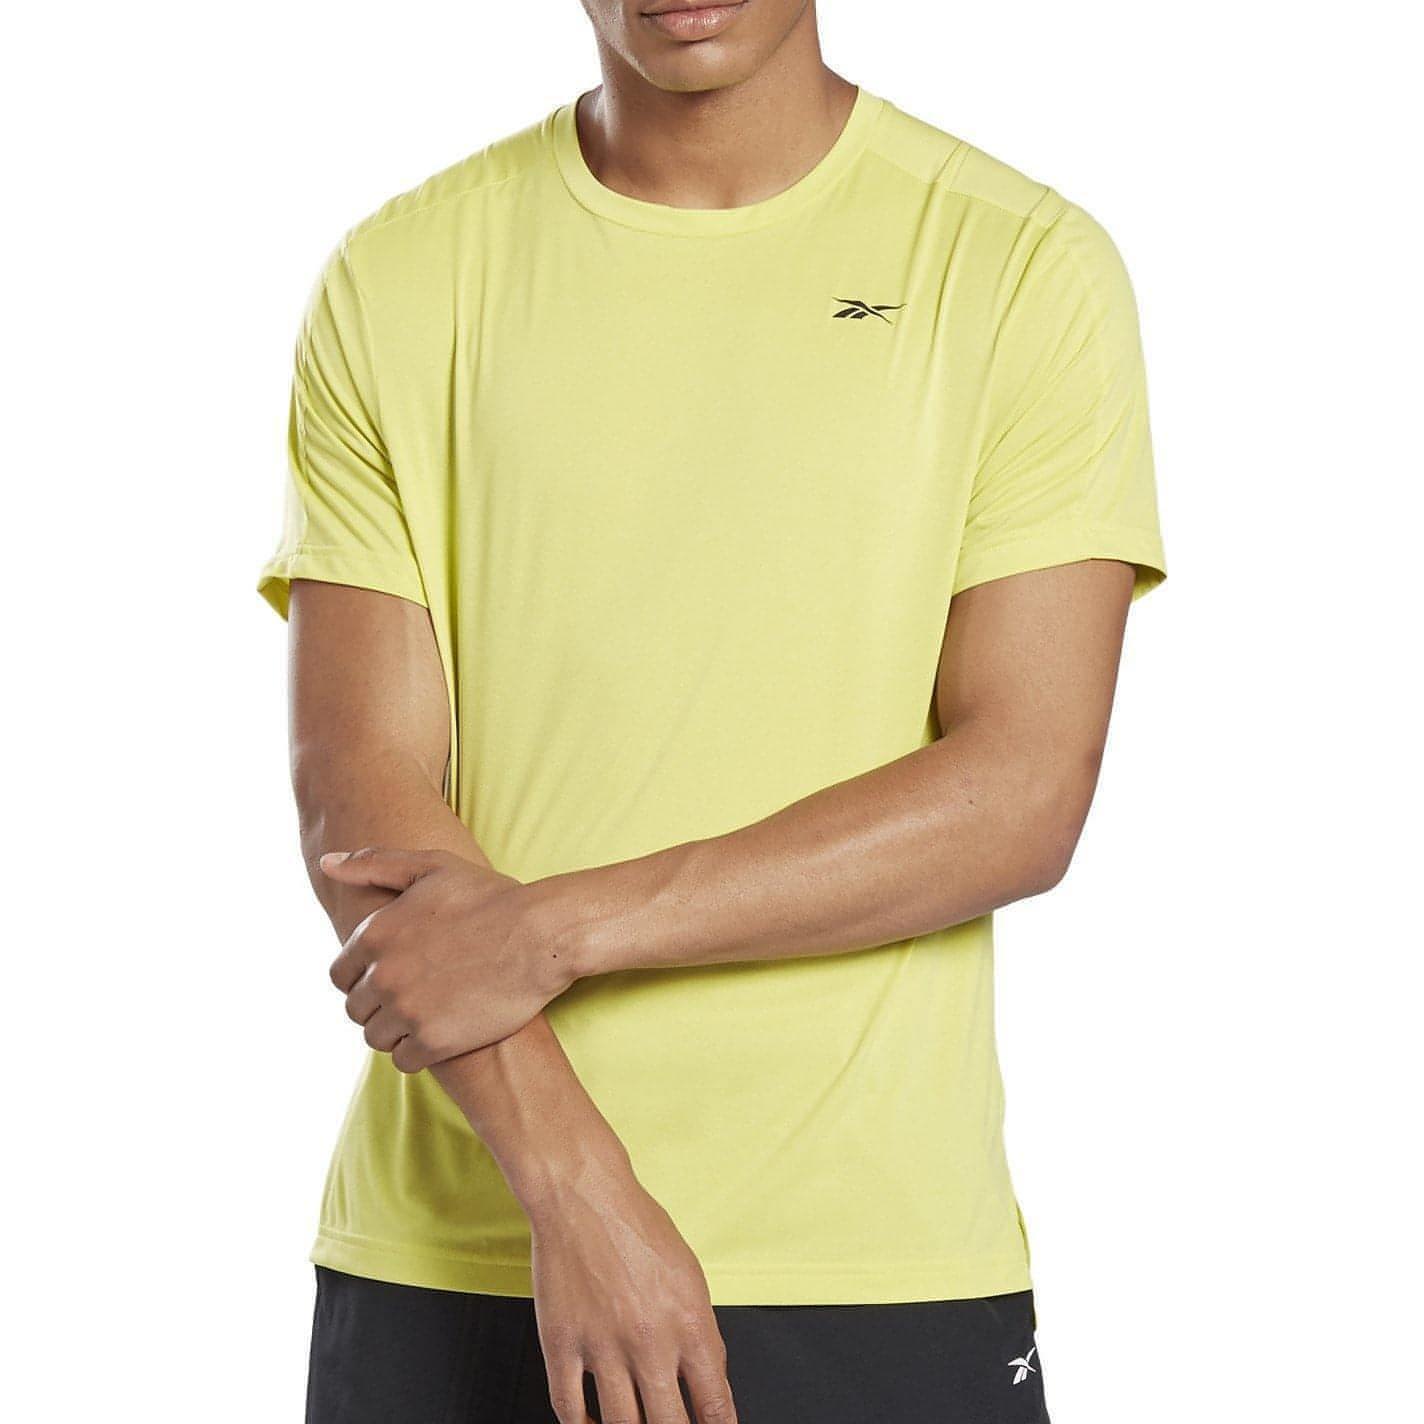 Reebok United by Fitness Perforated Short Sleeve Mens Training Top - Yellow - Start Fitness